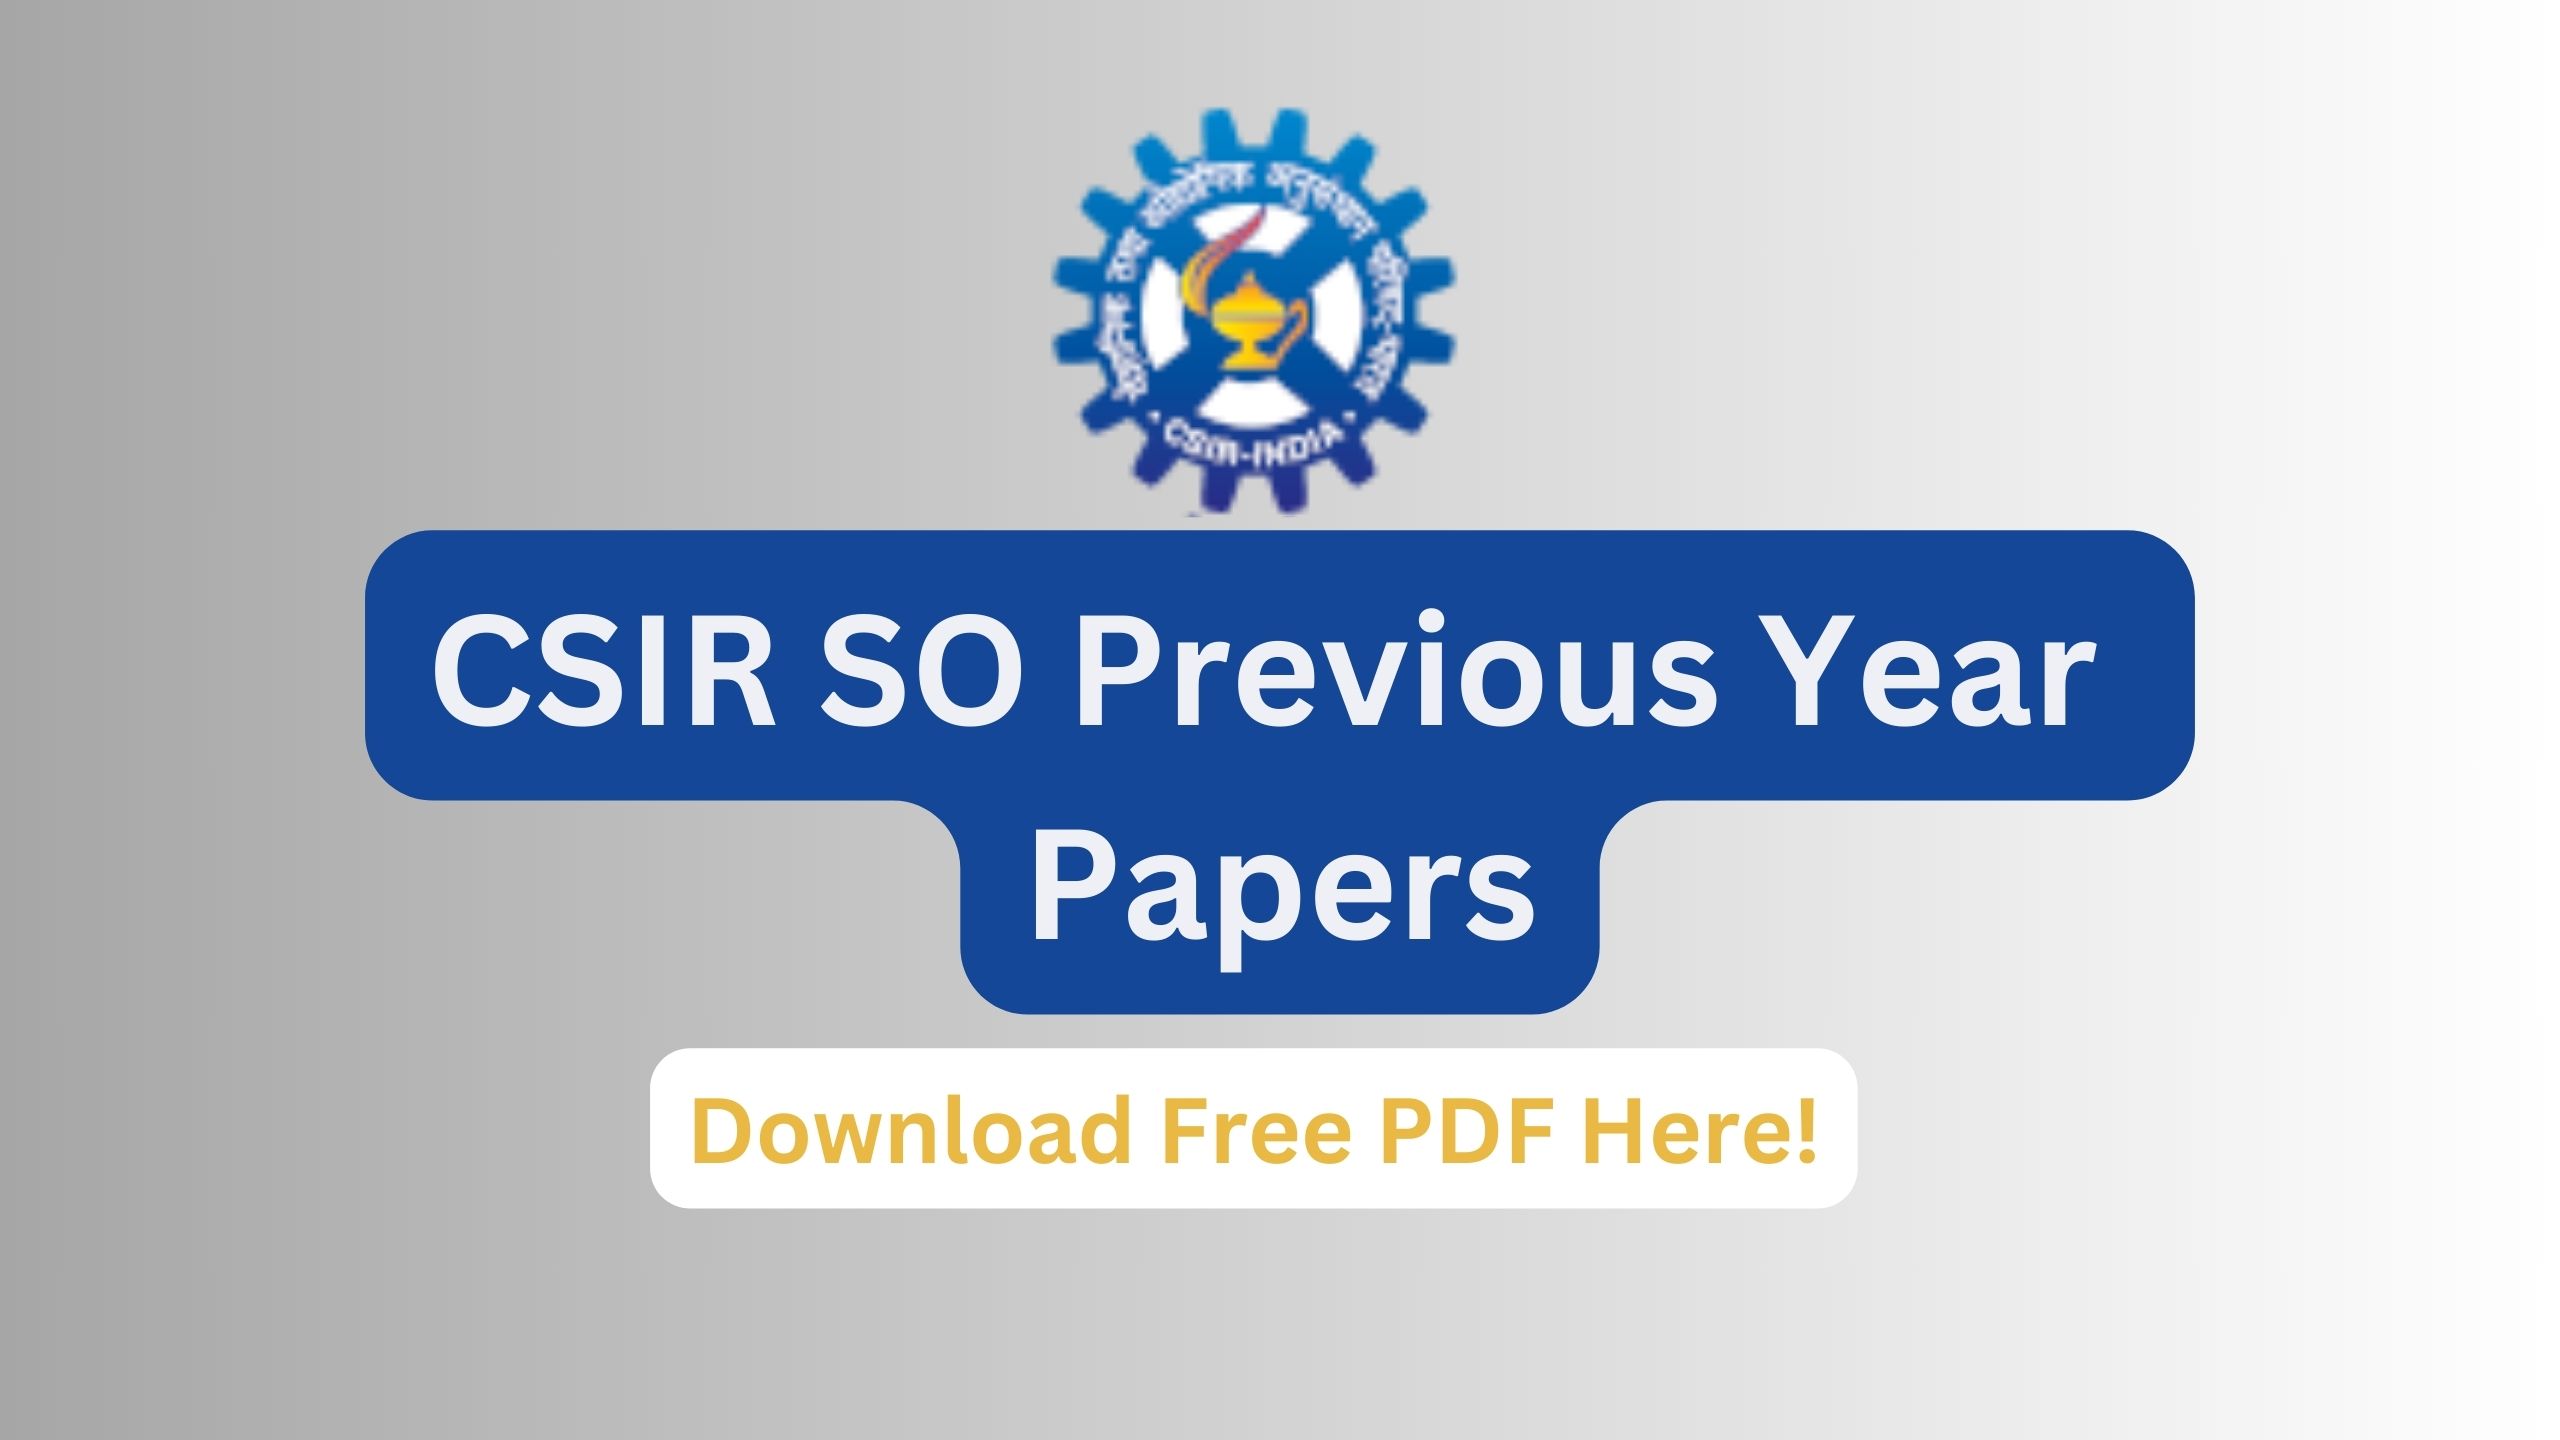 CSIR SO Previous Year Papers